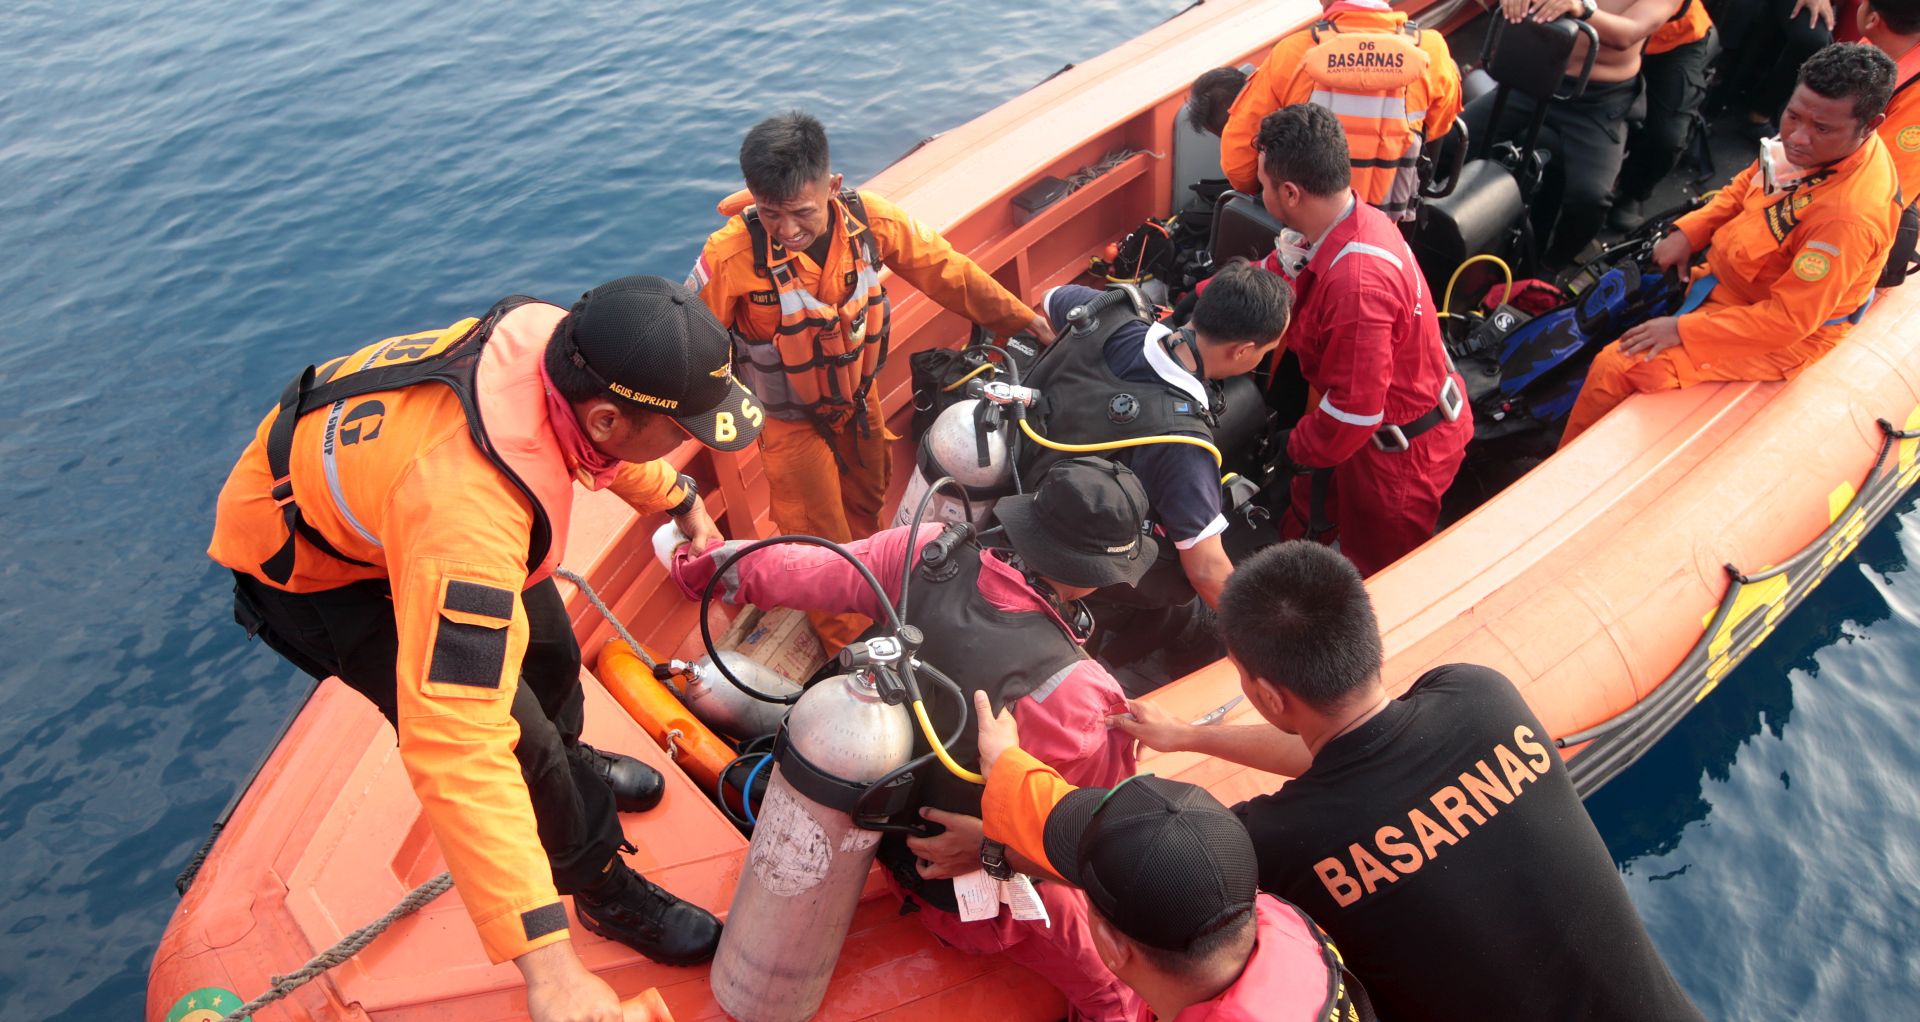 epa07133181 Indonesian rescue team operate during the recovery mission for the crashed Lion Air flight JT-610 plane at Tanjung Pakis Sea, West Java, Indonesia, 31 October 2018. According to media reports, Lion Air flight JT-610 lost contact with air traffic controllers soon after takeoff then crashed into the sea on 29 October 2018. The flight was en route to Pangkal Pinang, and reportedly had 189 people onboard.  EPA/BAGUS INDAHONO